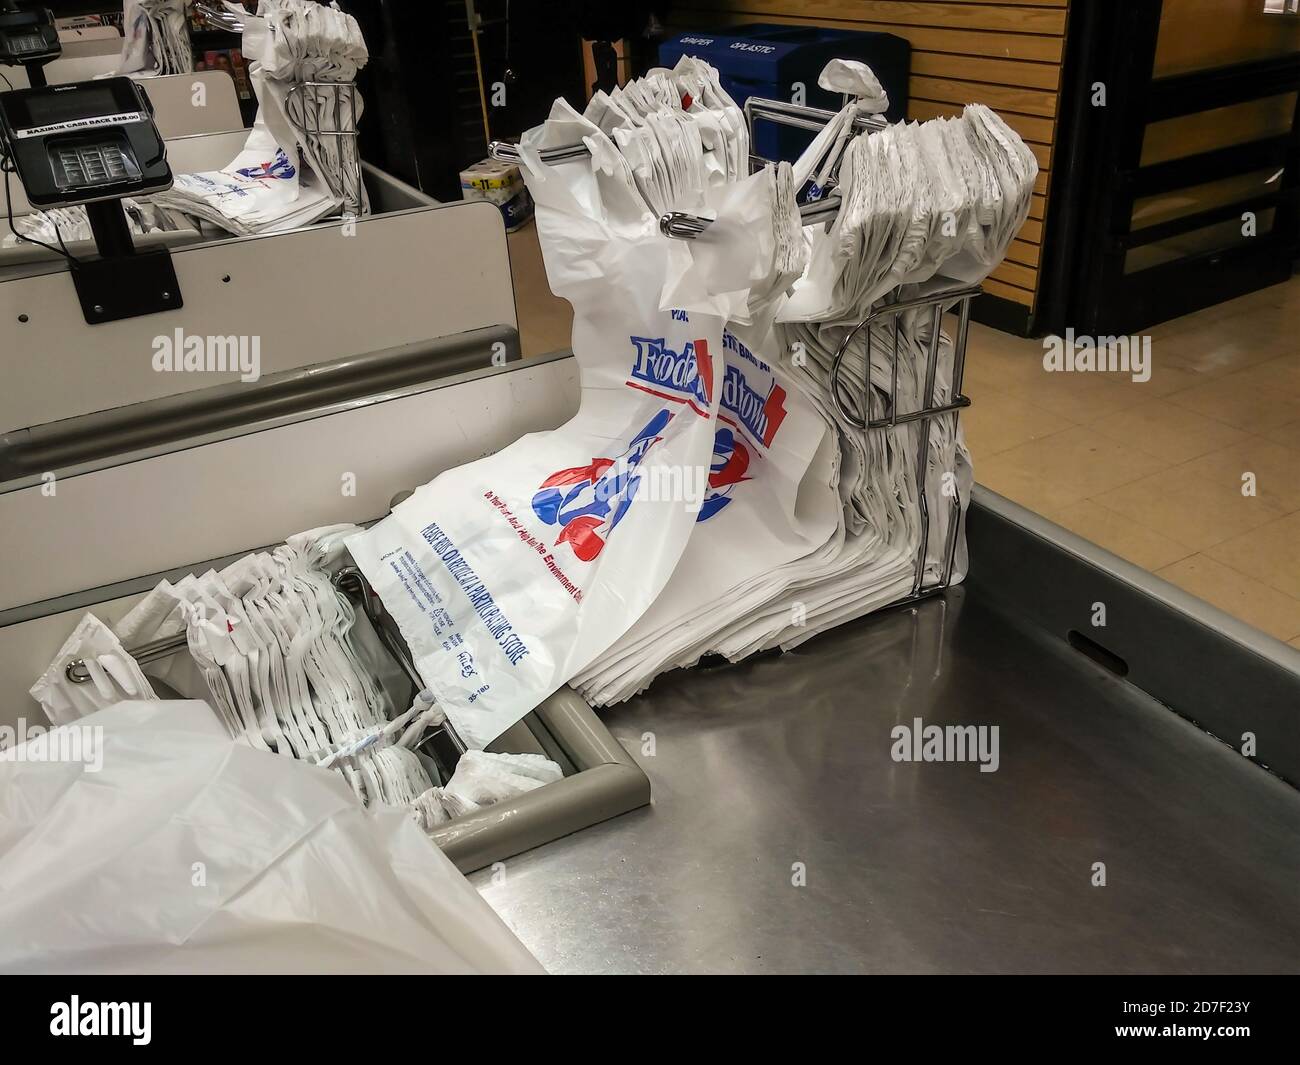 Plastic bags at a Gristedes supermarket in New York on Tuesday, October 20 2020. The New York statewide ban on single-use plastic bags involved in retail sales took effect October 19. (© Richard B. Levine) Stock Photo